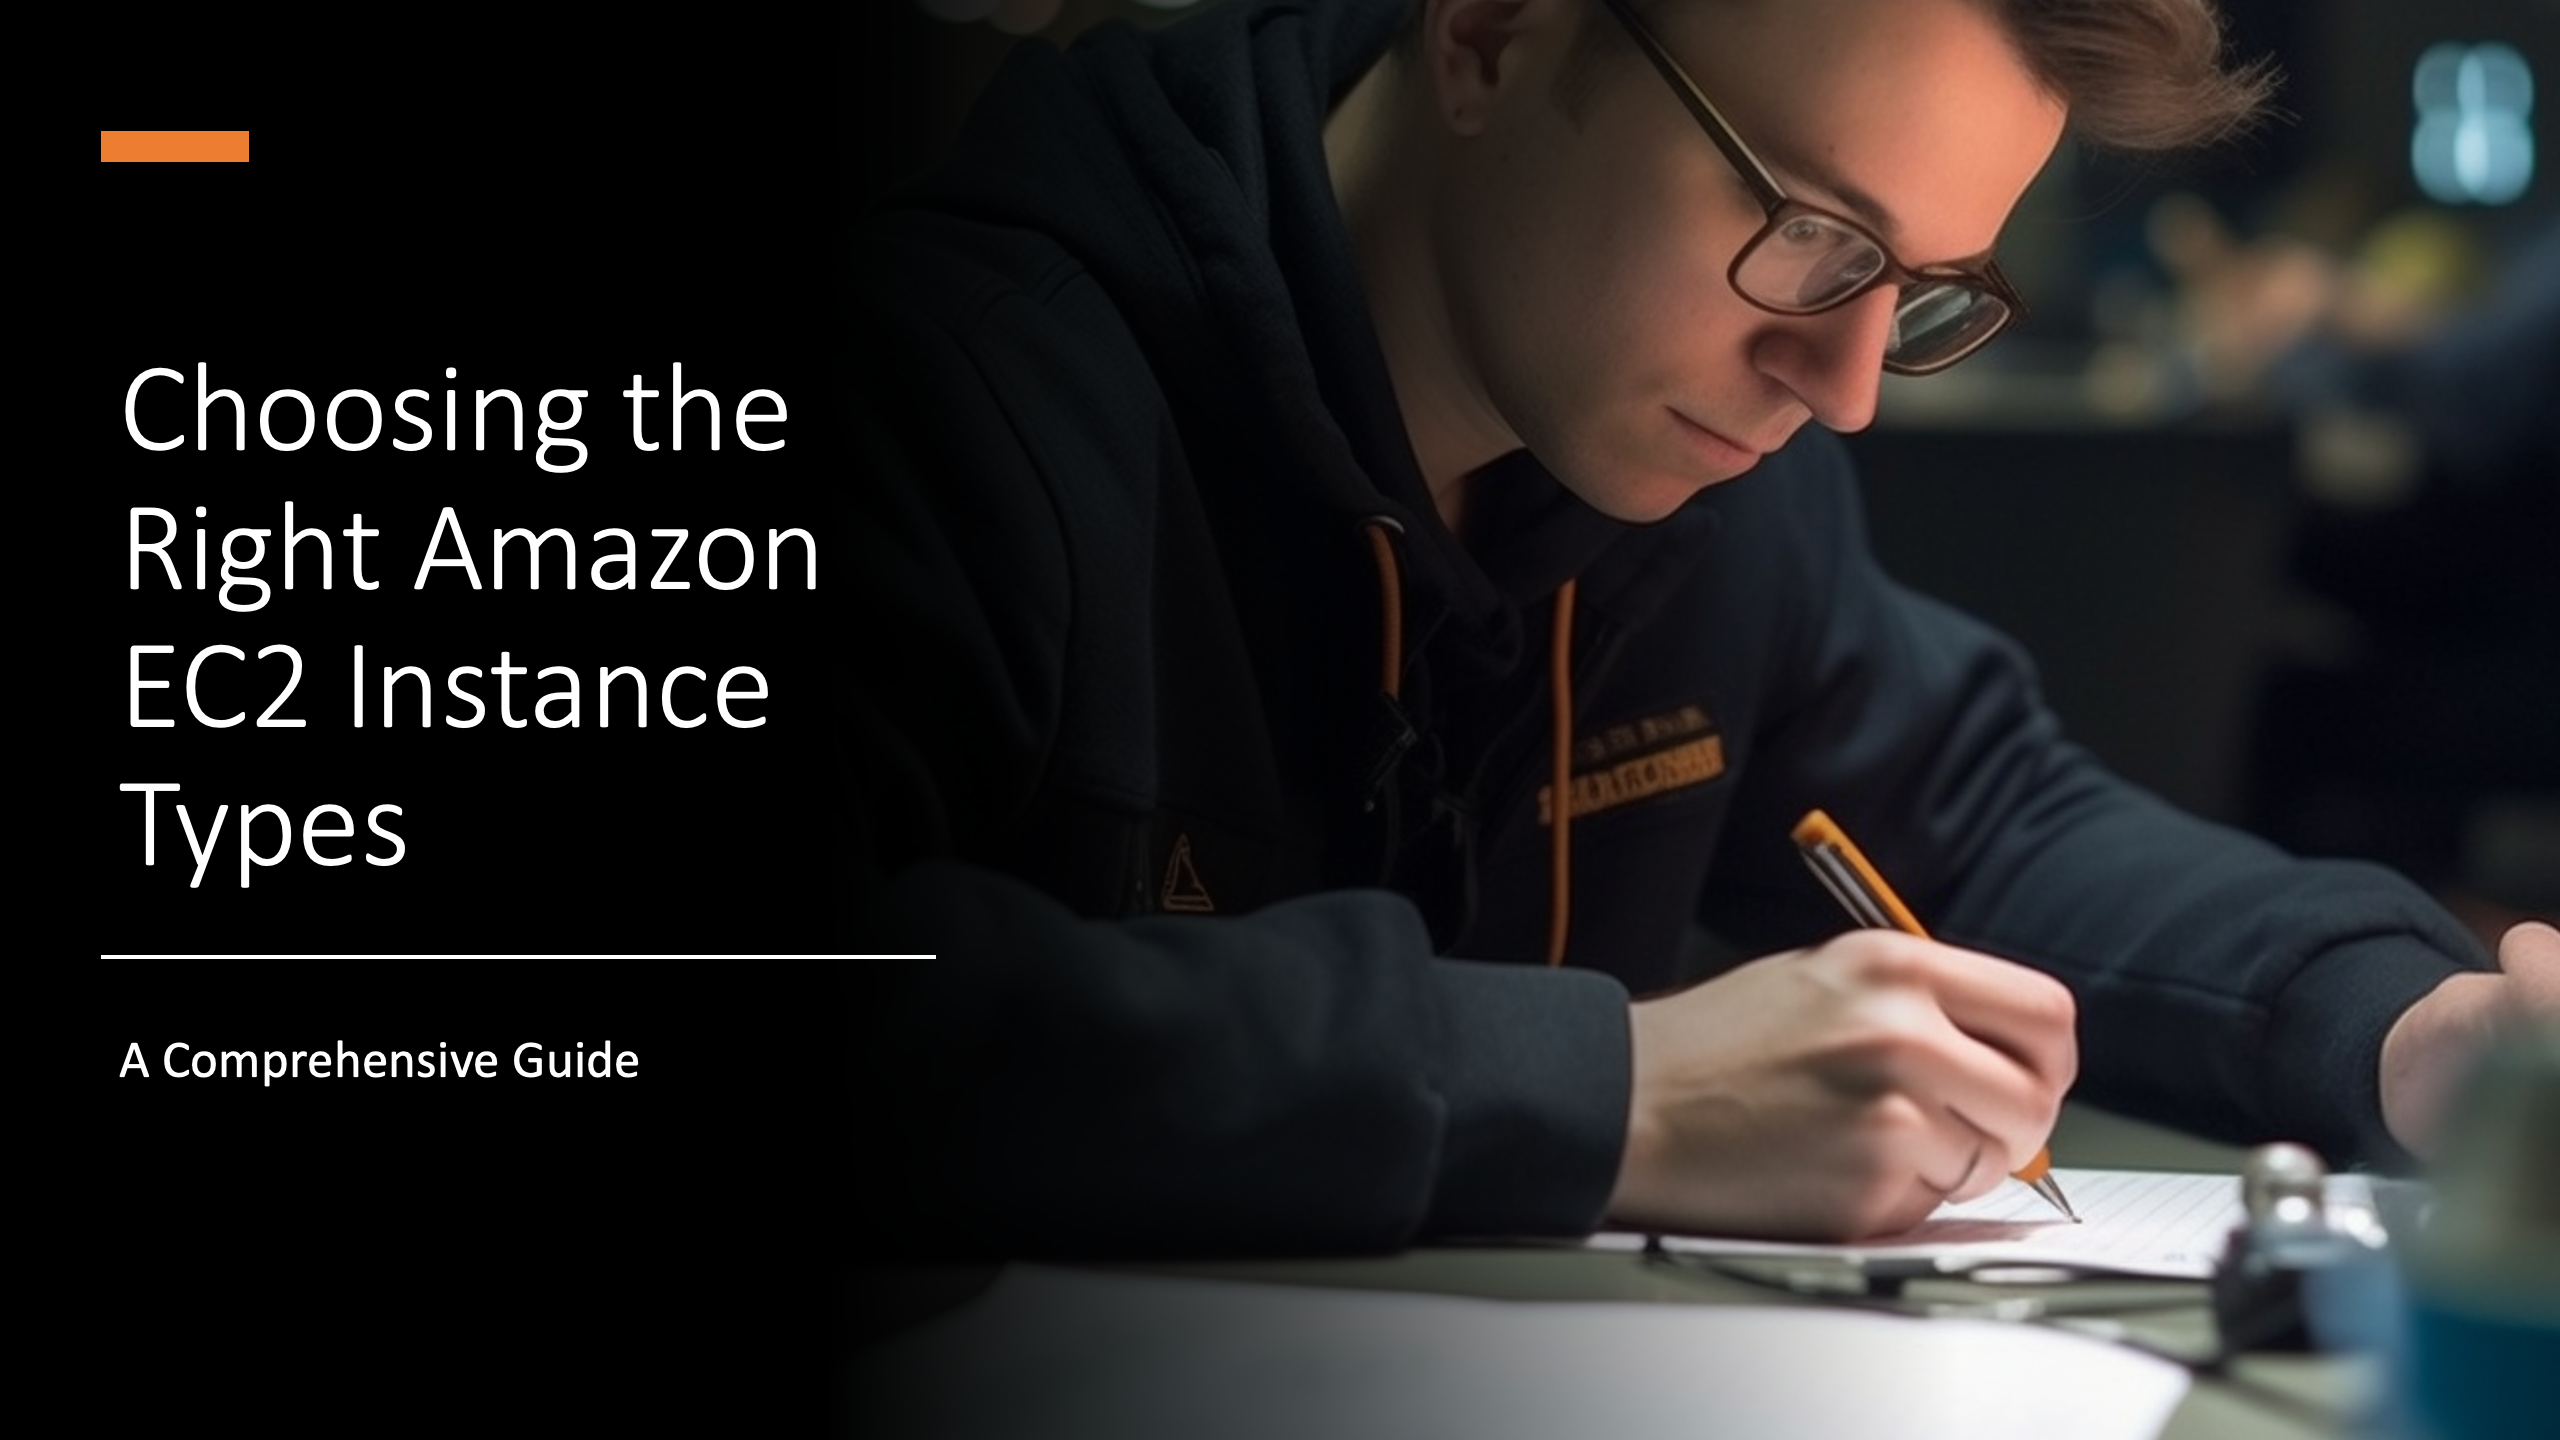 Choosing the Right Amazon EC2 Instance Types - A Comprehensive Guide